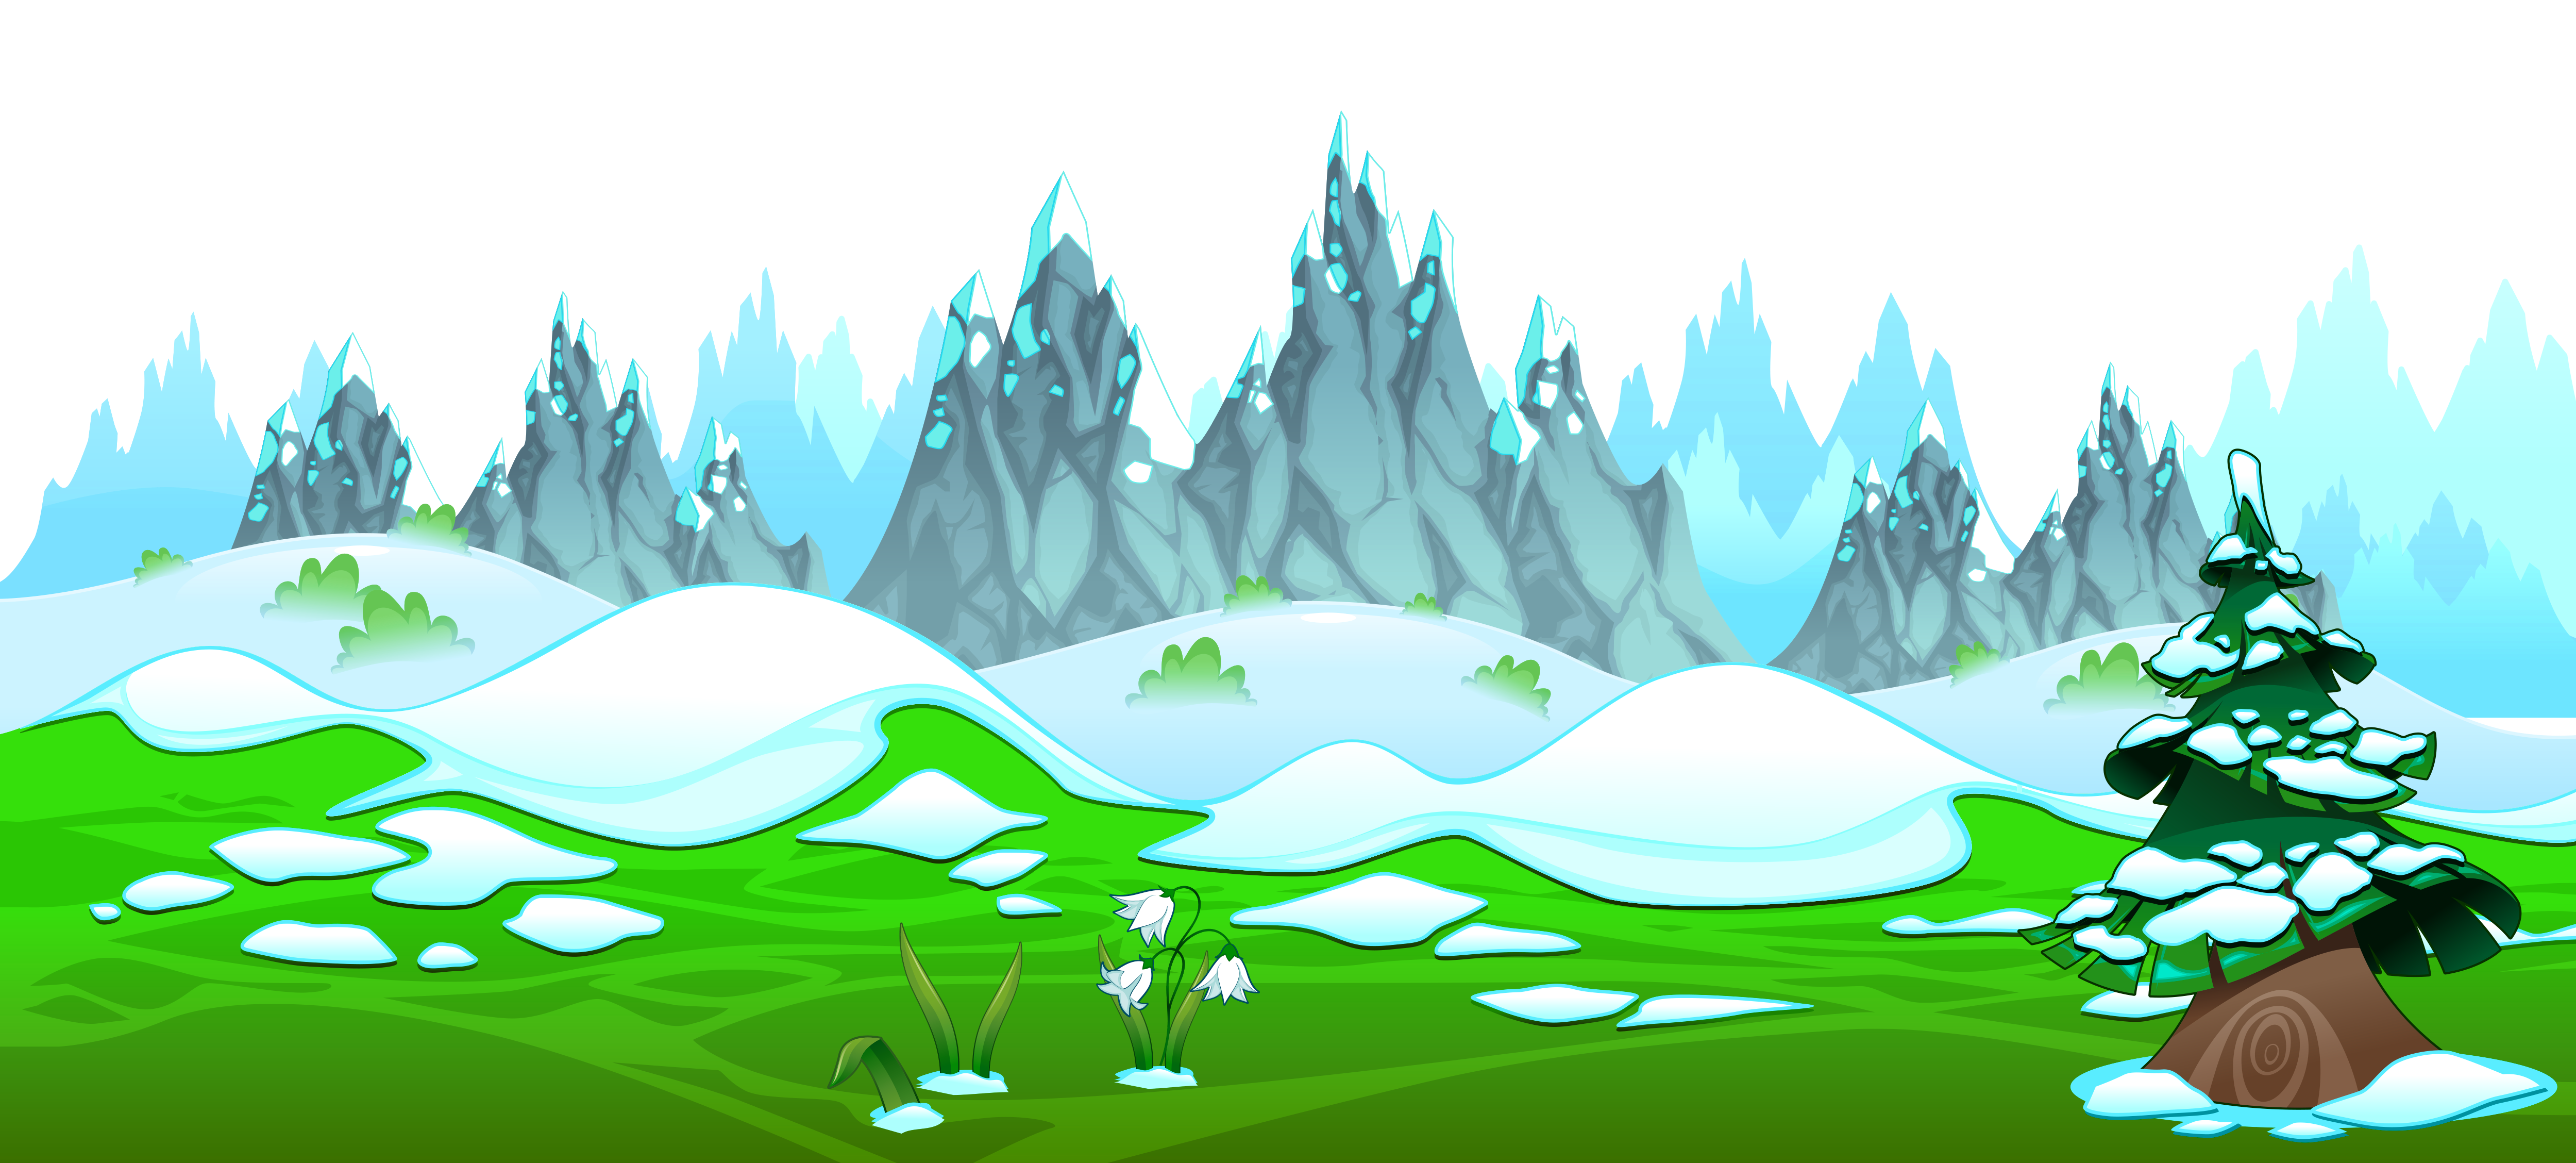 Early spring with icy mountains ground clipart